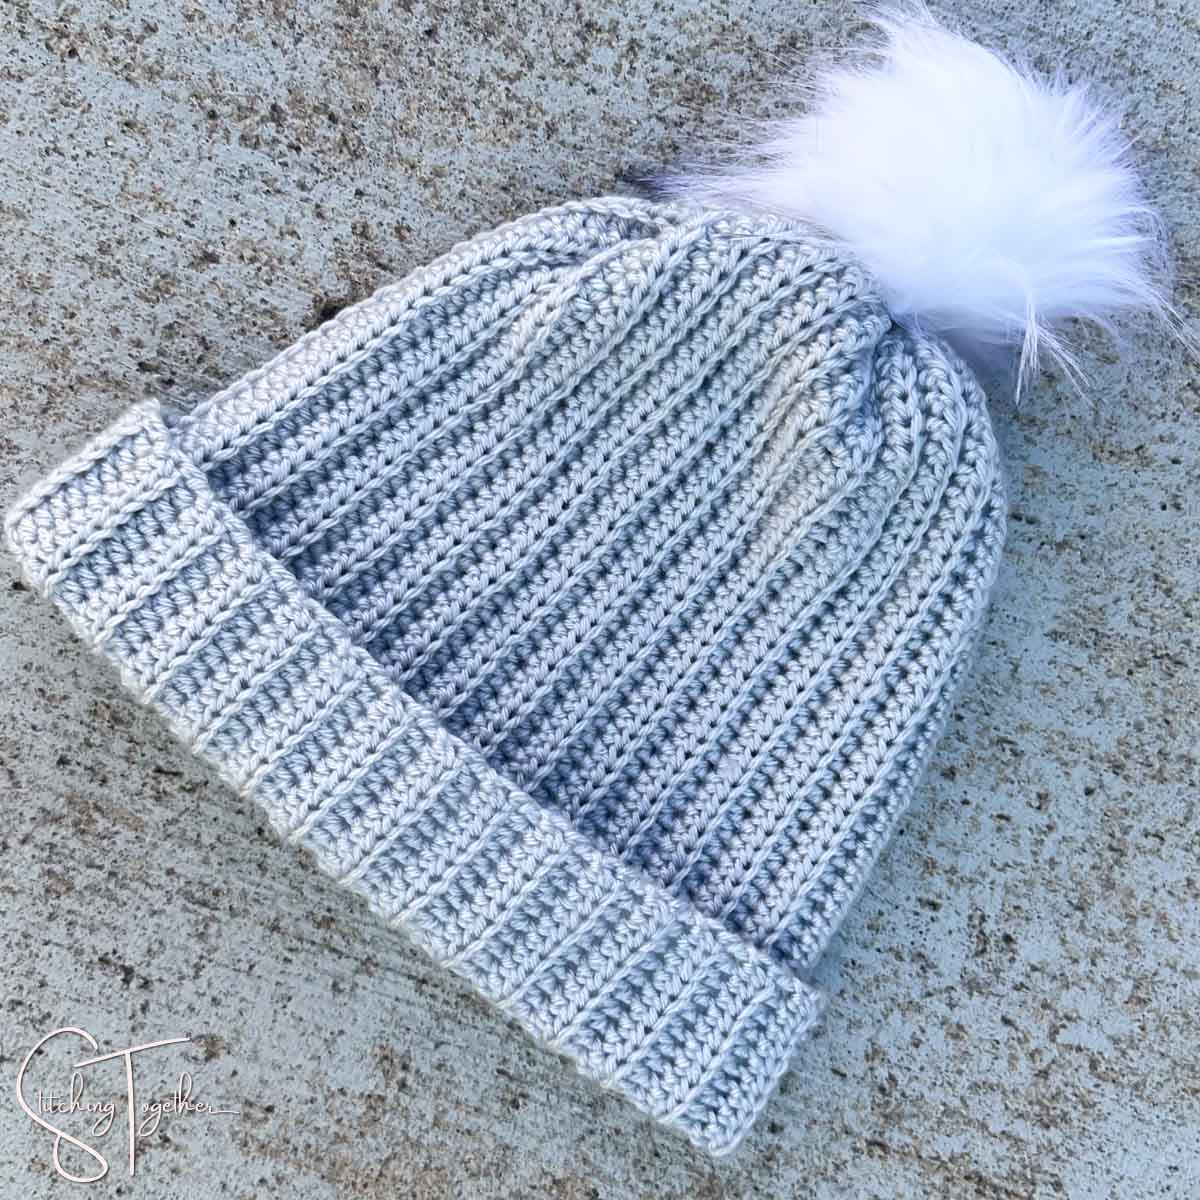 gray crochet ribbed hat with a white pom pom laying on the ground